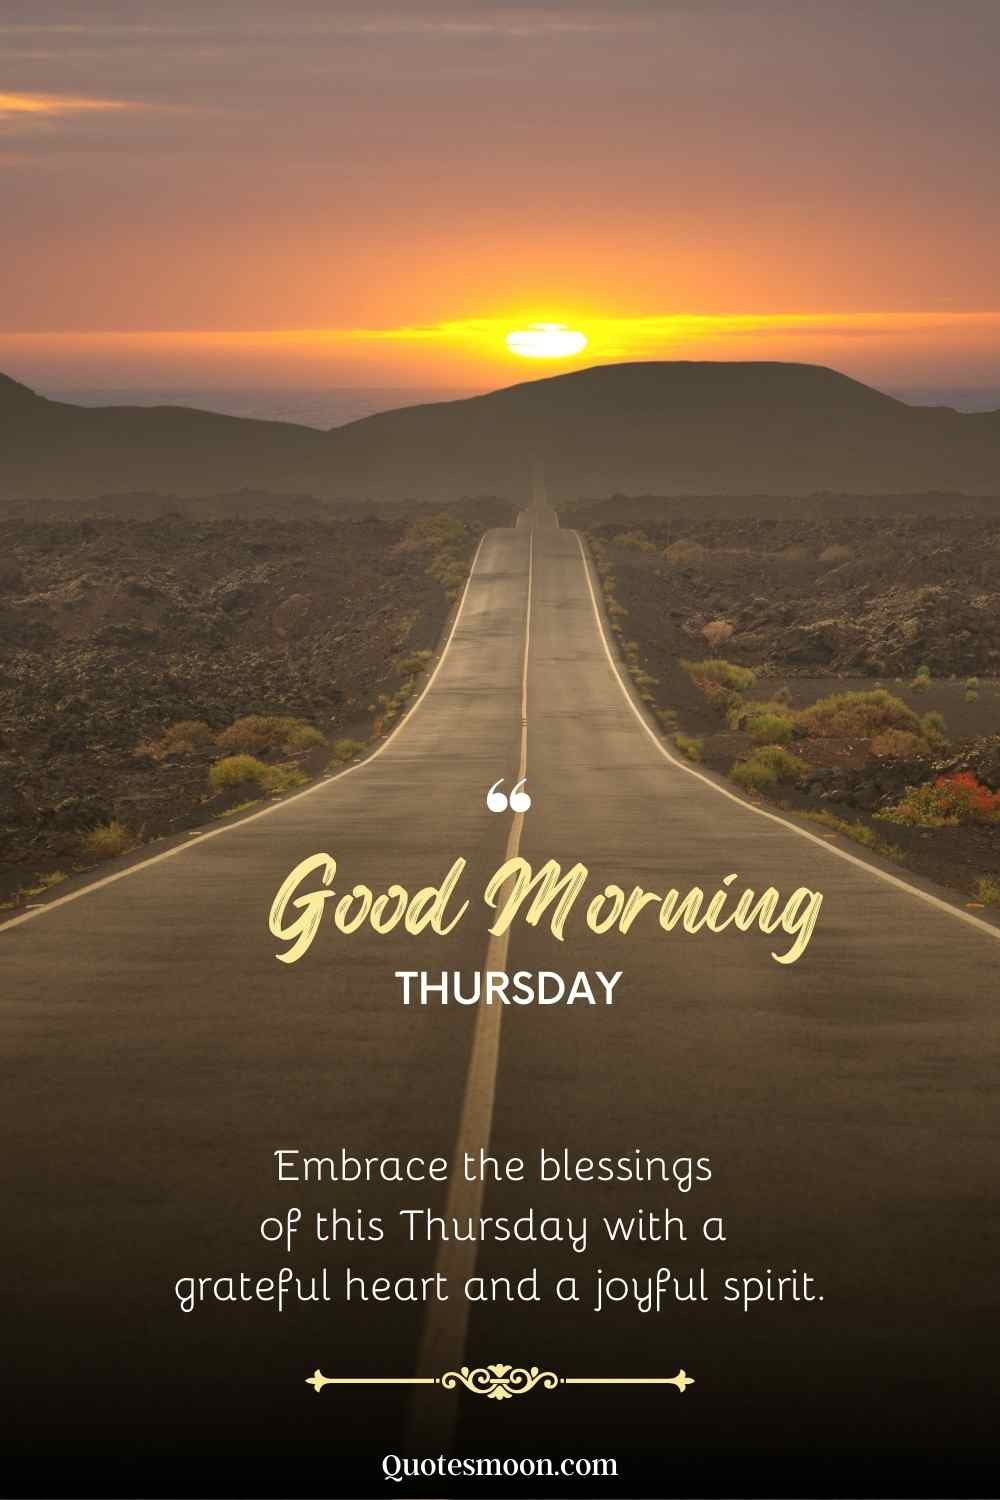 thursday morning long drive wishes images HD